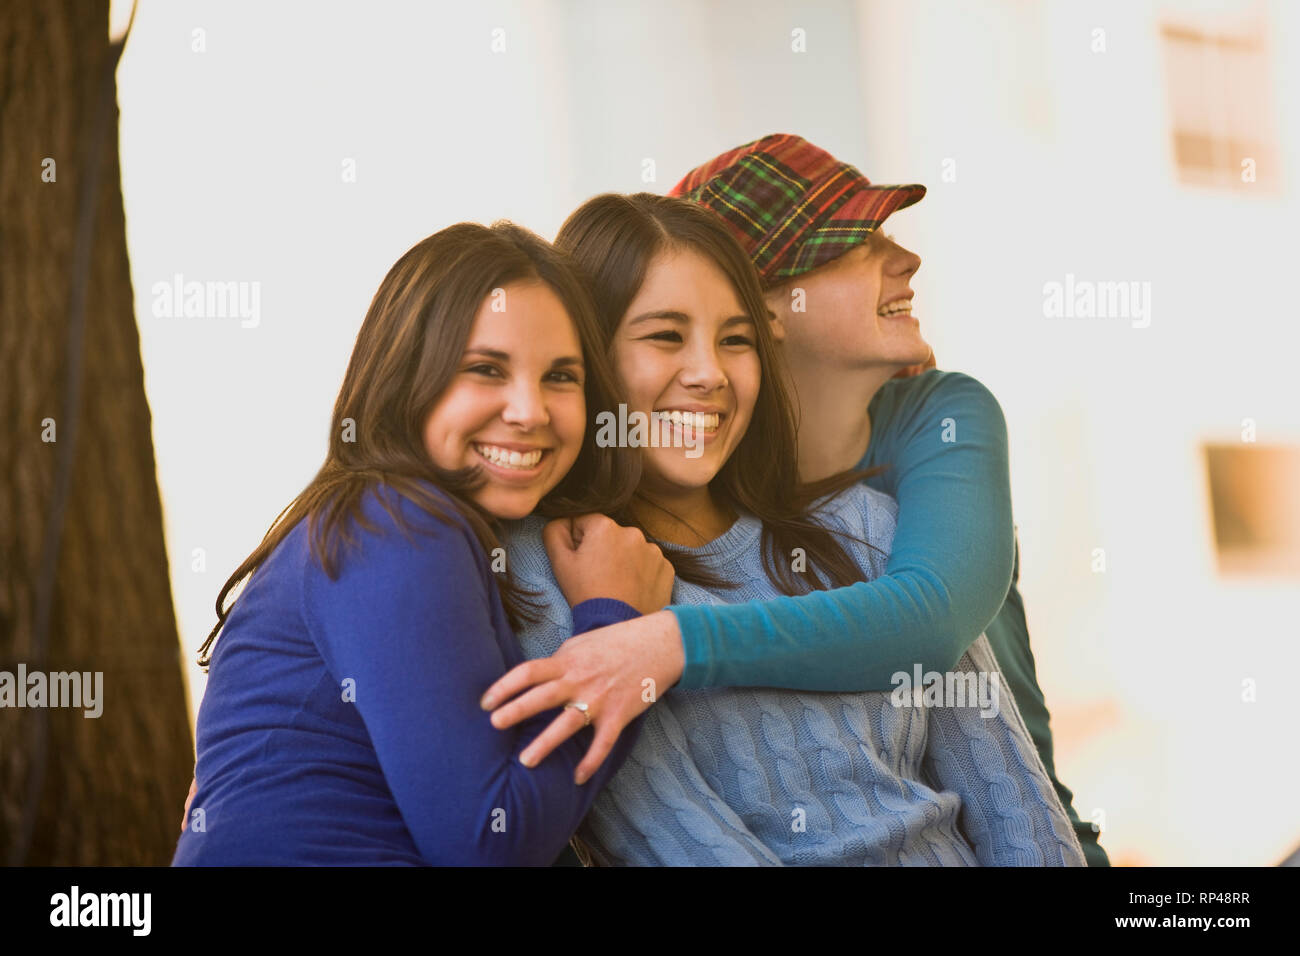 Girls hugging each other Stock Photo